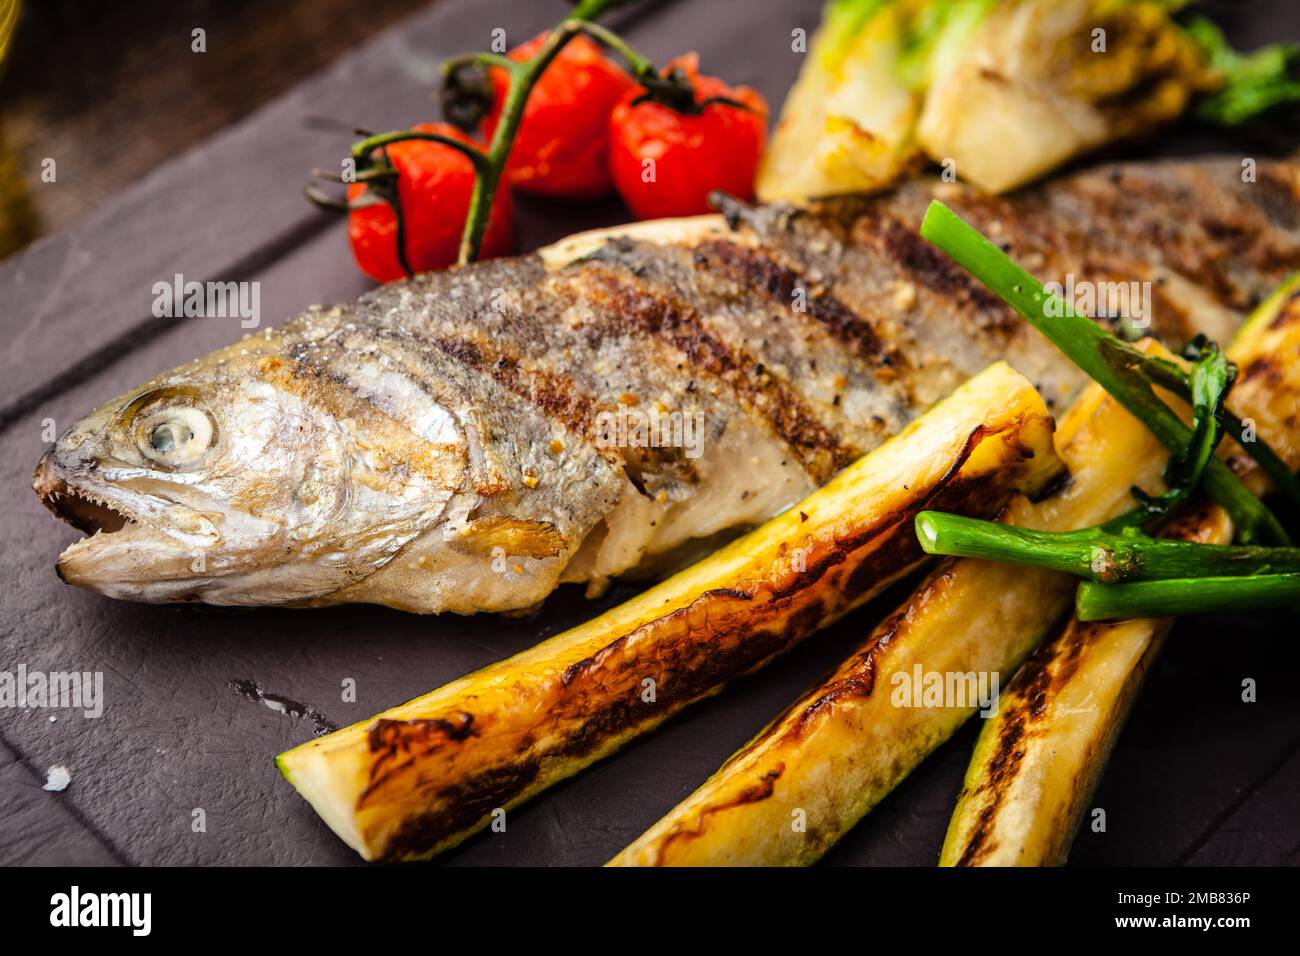 Rainbow trout grilled. Vegetables, white wine sauce. Delicious healthy traditional food closeup served for lunch in modern gourmet cuisine restaurant Stock Photo